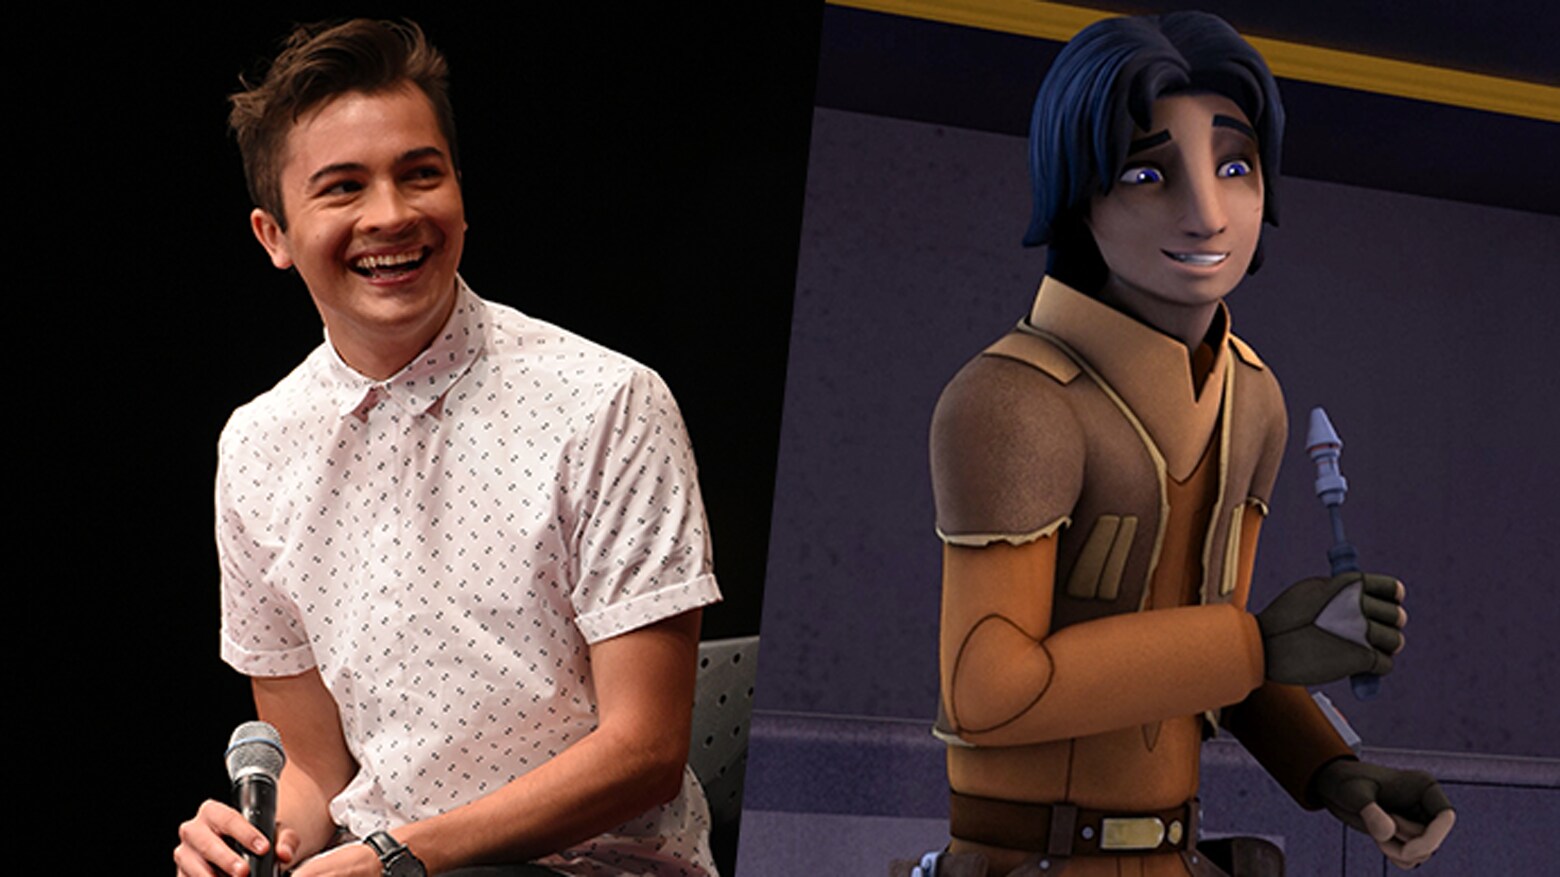 From Street Rat to Padawan: Taylor Gray on Ezra Bridger and the Star Wars Rebels Experience